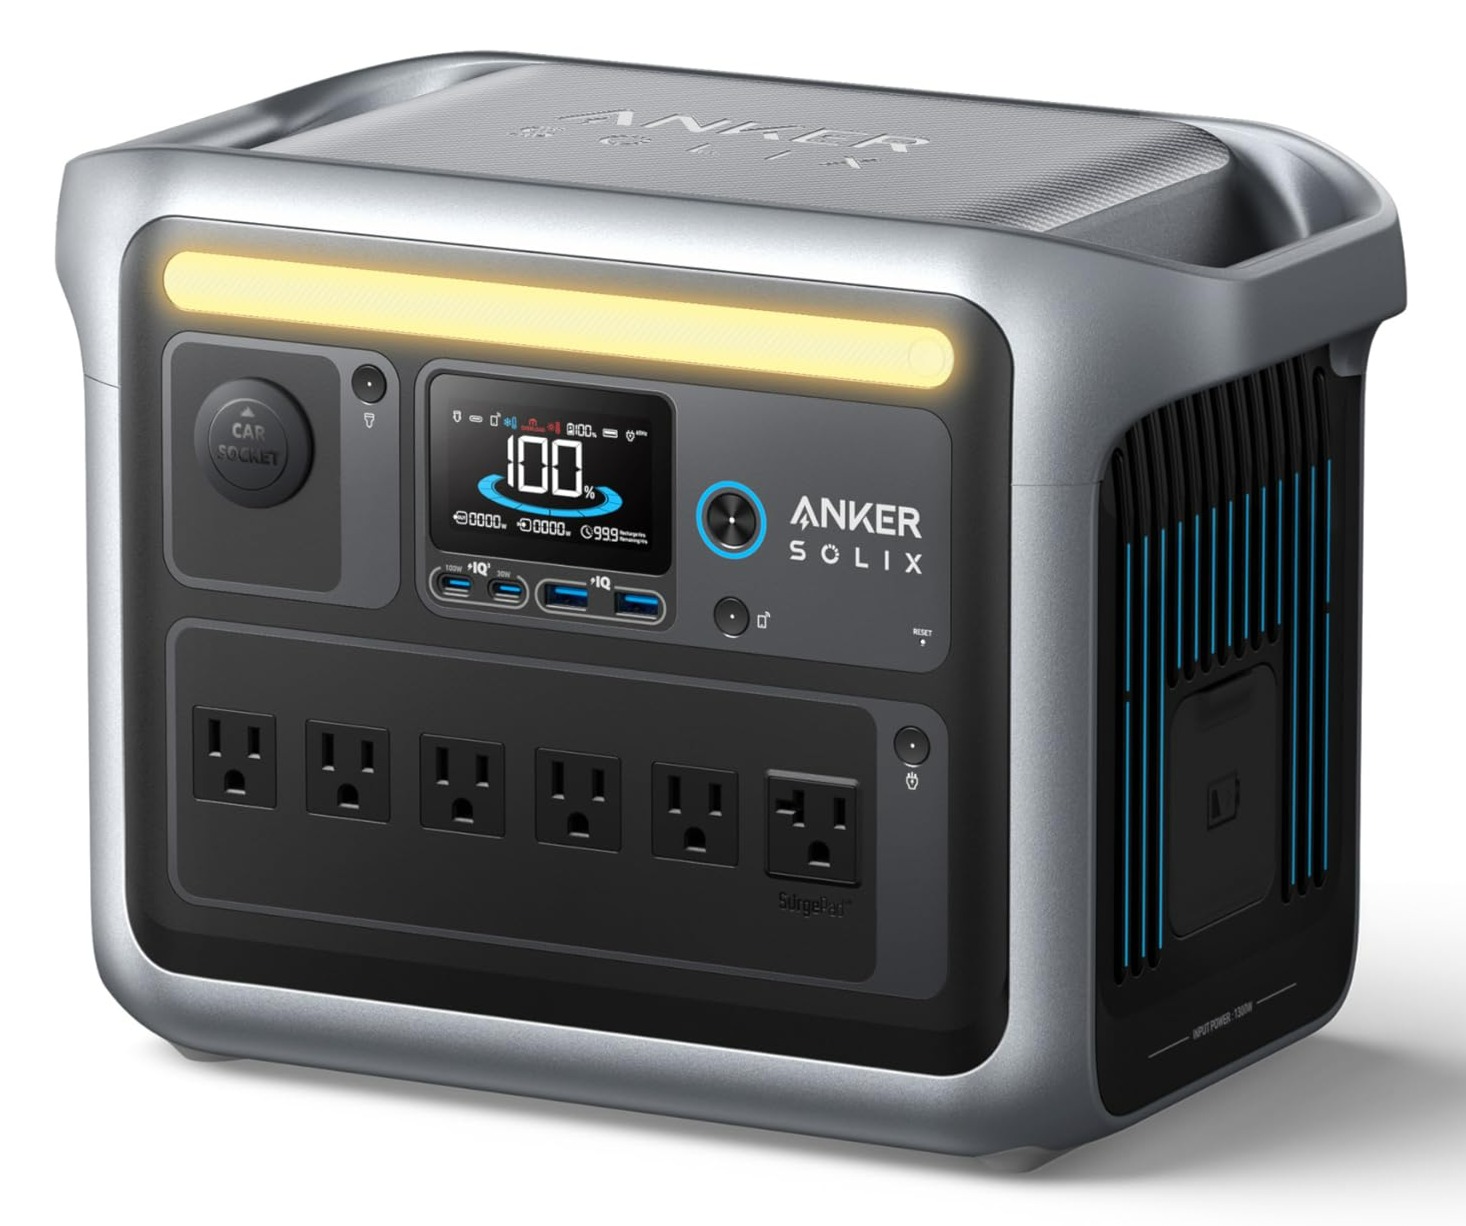 Anker Solix C1000 Portable Power Station 1056Wh, 1800W = $649.00 at Amazon and Anker.com